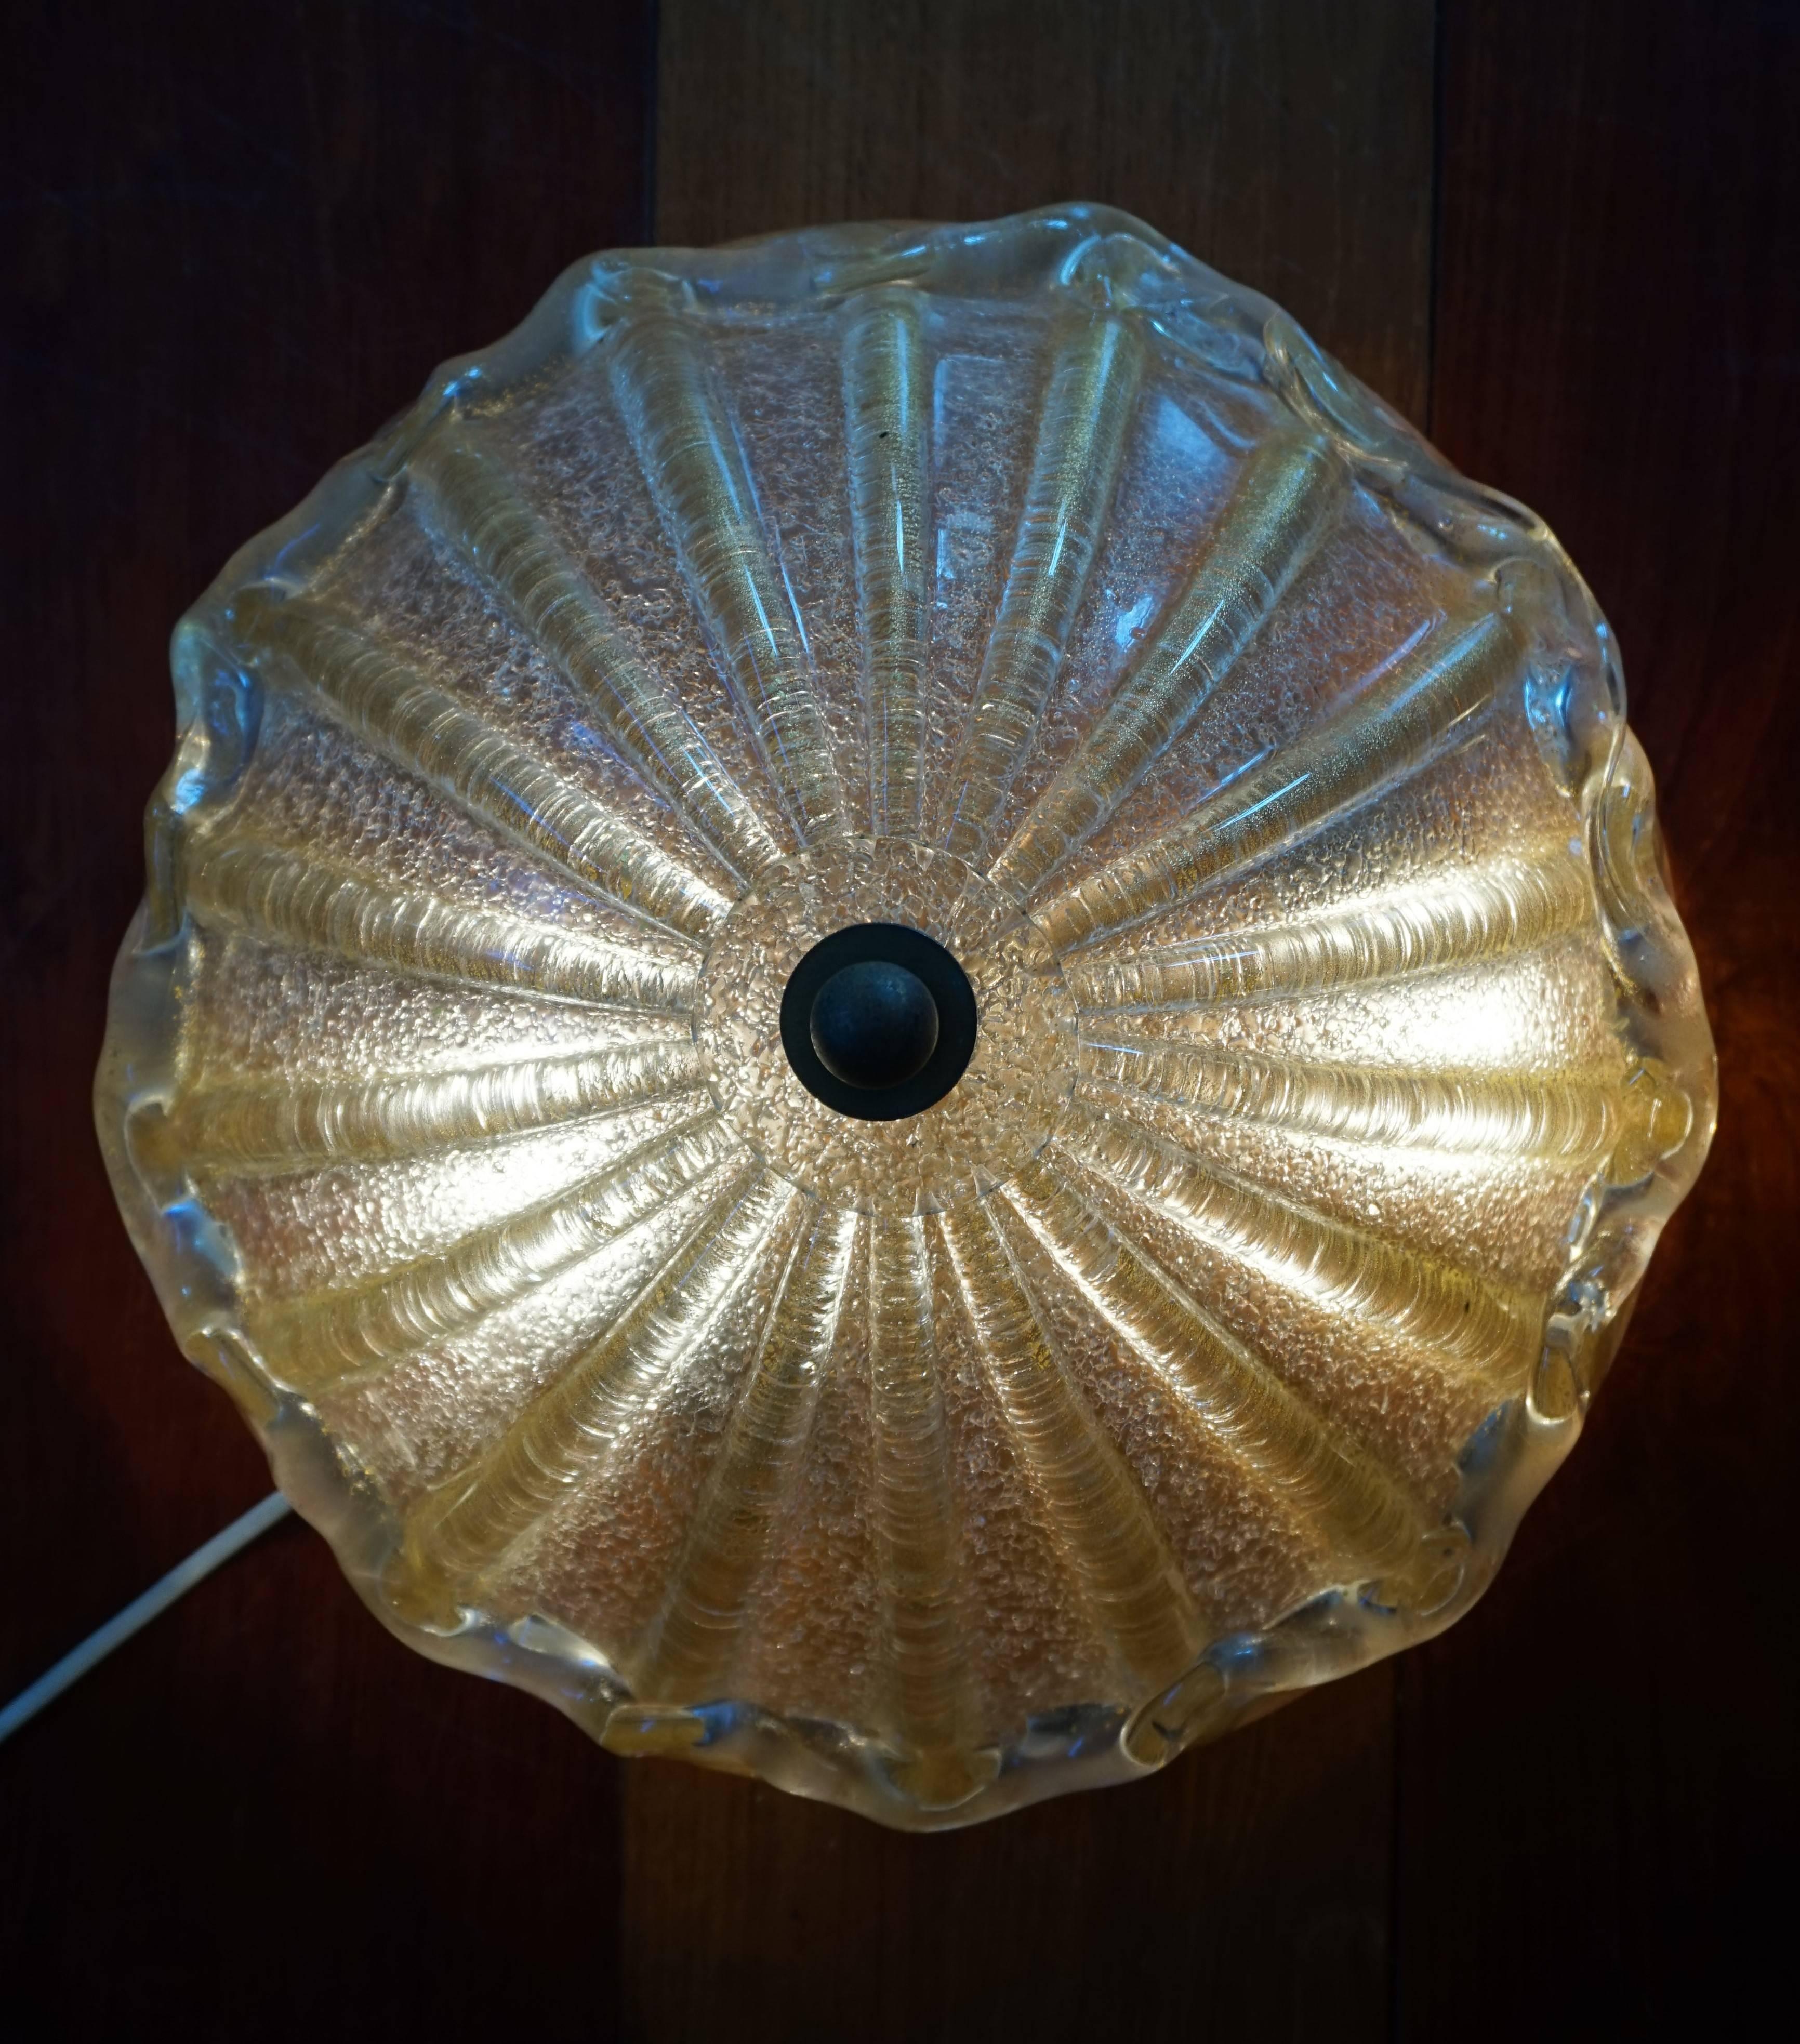 Handcrafted and mouthblown Seguso Murano ceiling lamp.

We actually bought this stunning Murano flush mount from the first owner. She had acquired it in the late 1950s from a well respected, Amsterdam based dealer in high-end furniture and lighting